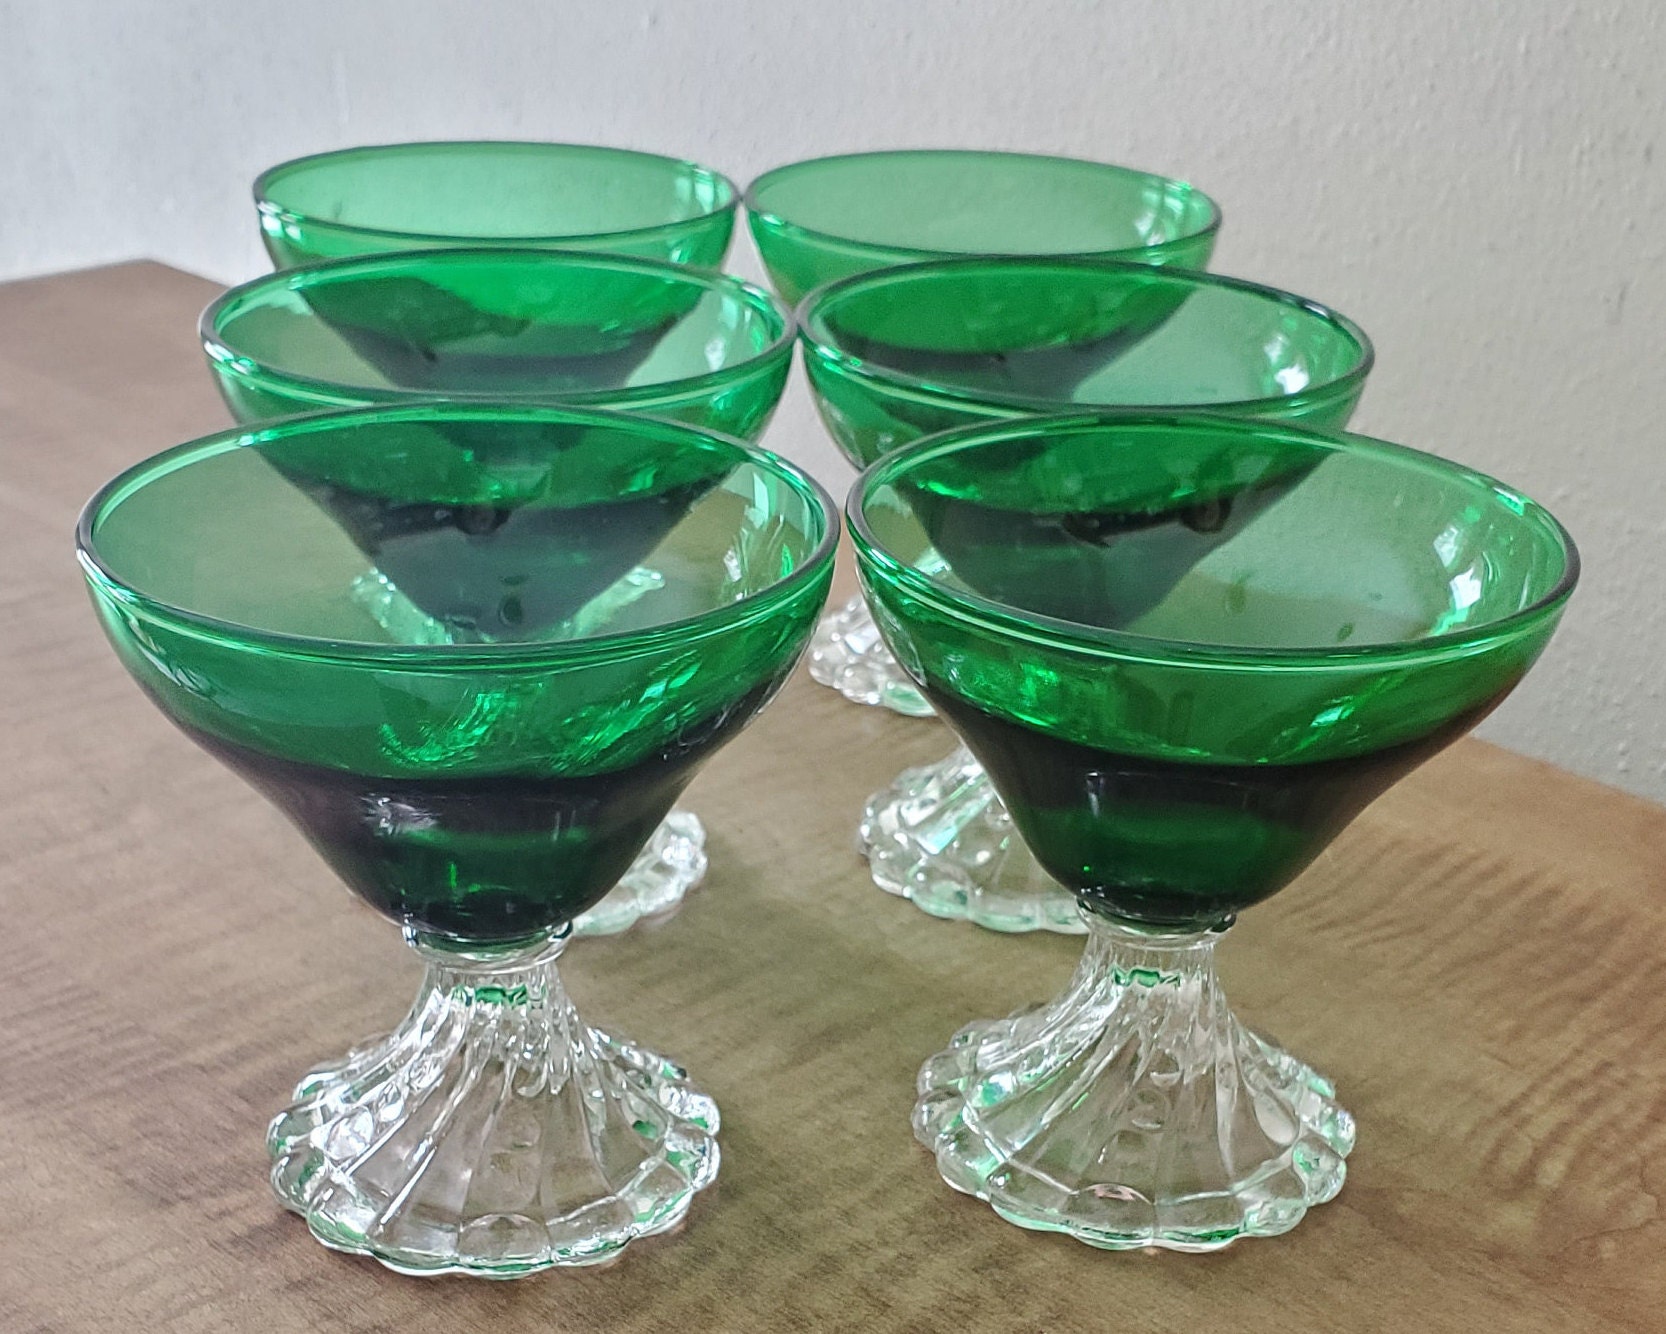 Mid Century Modern Green Faceted Indiana Glass Drinking Glasses - Set of 8